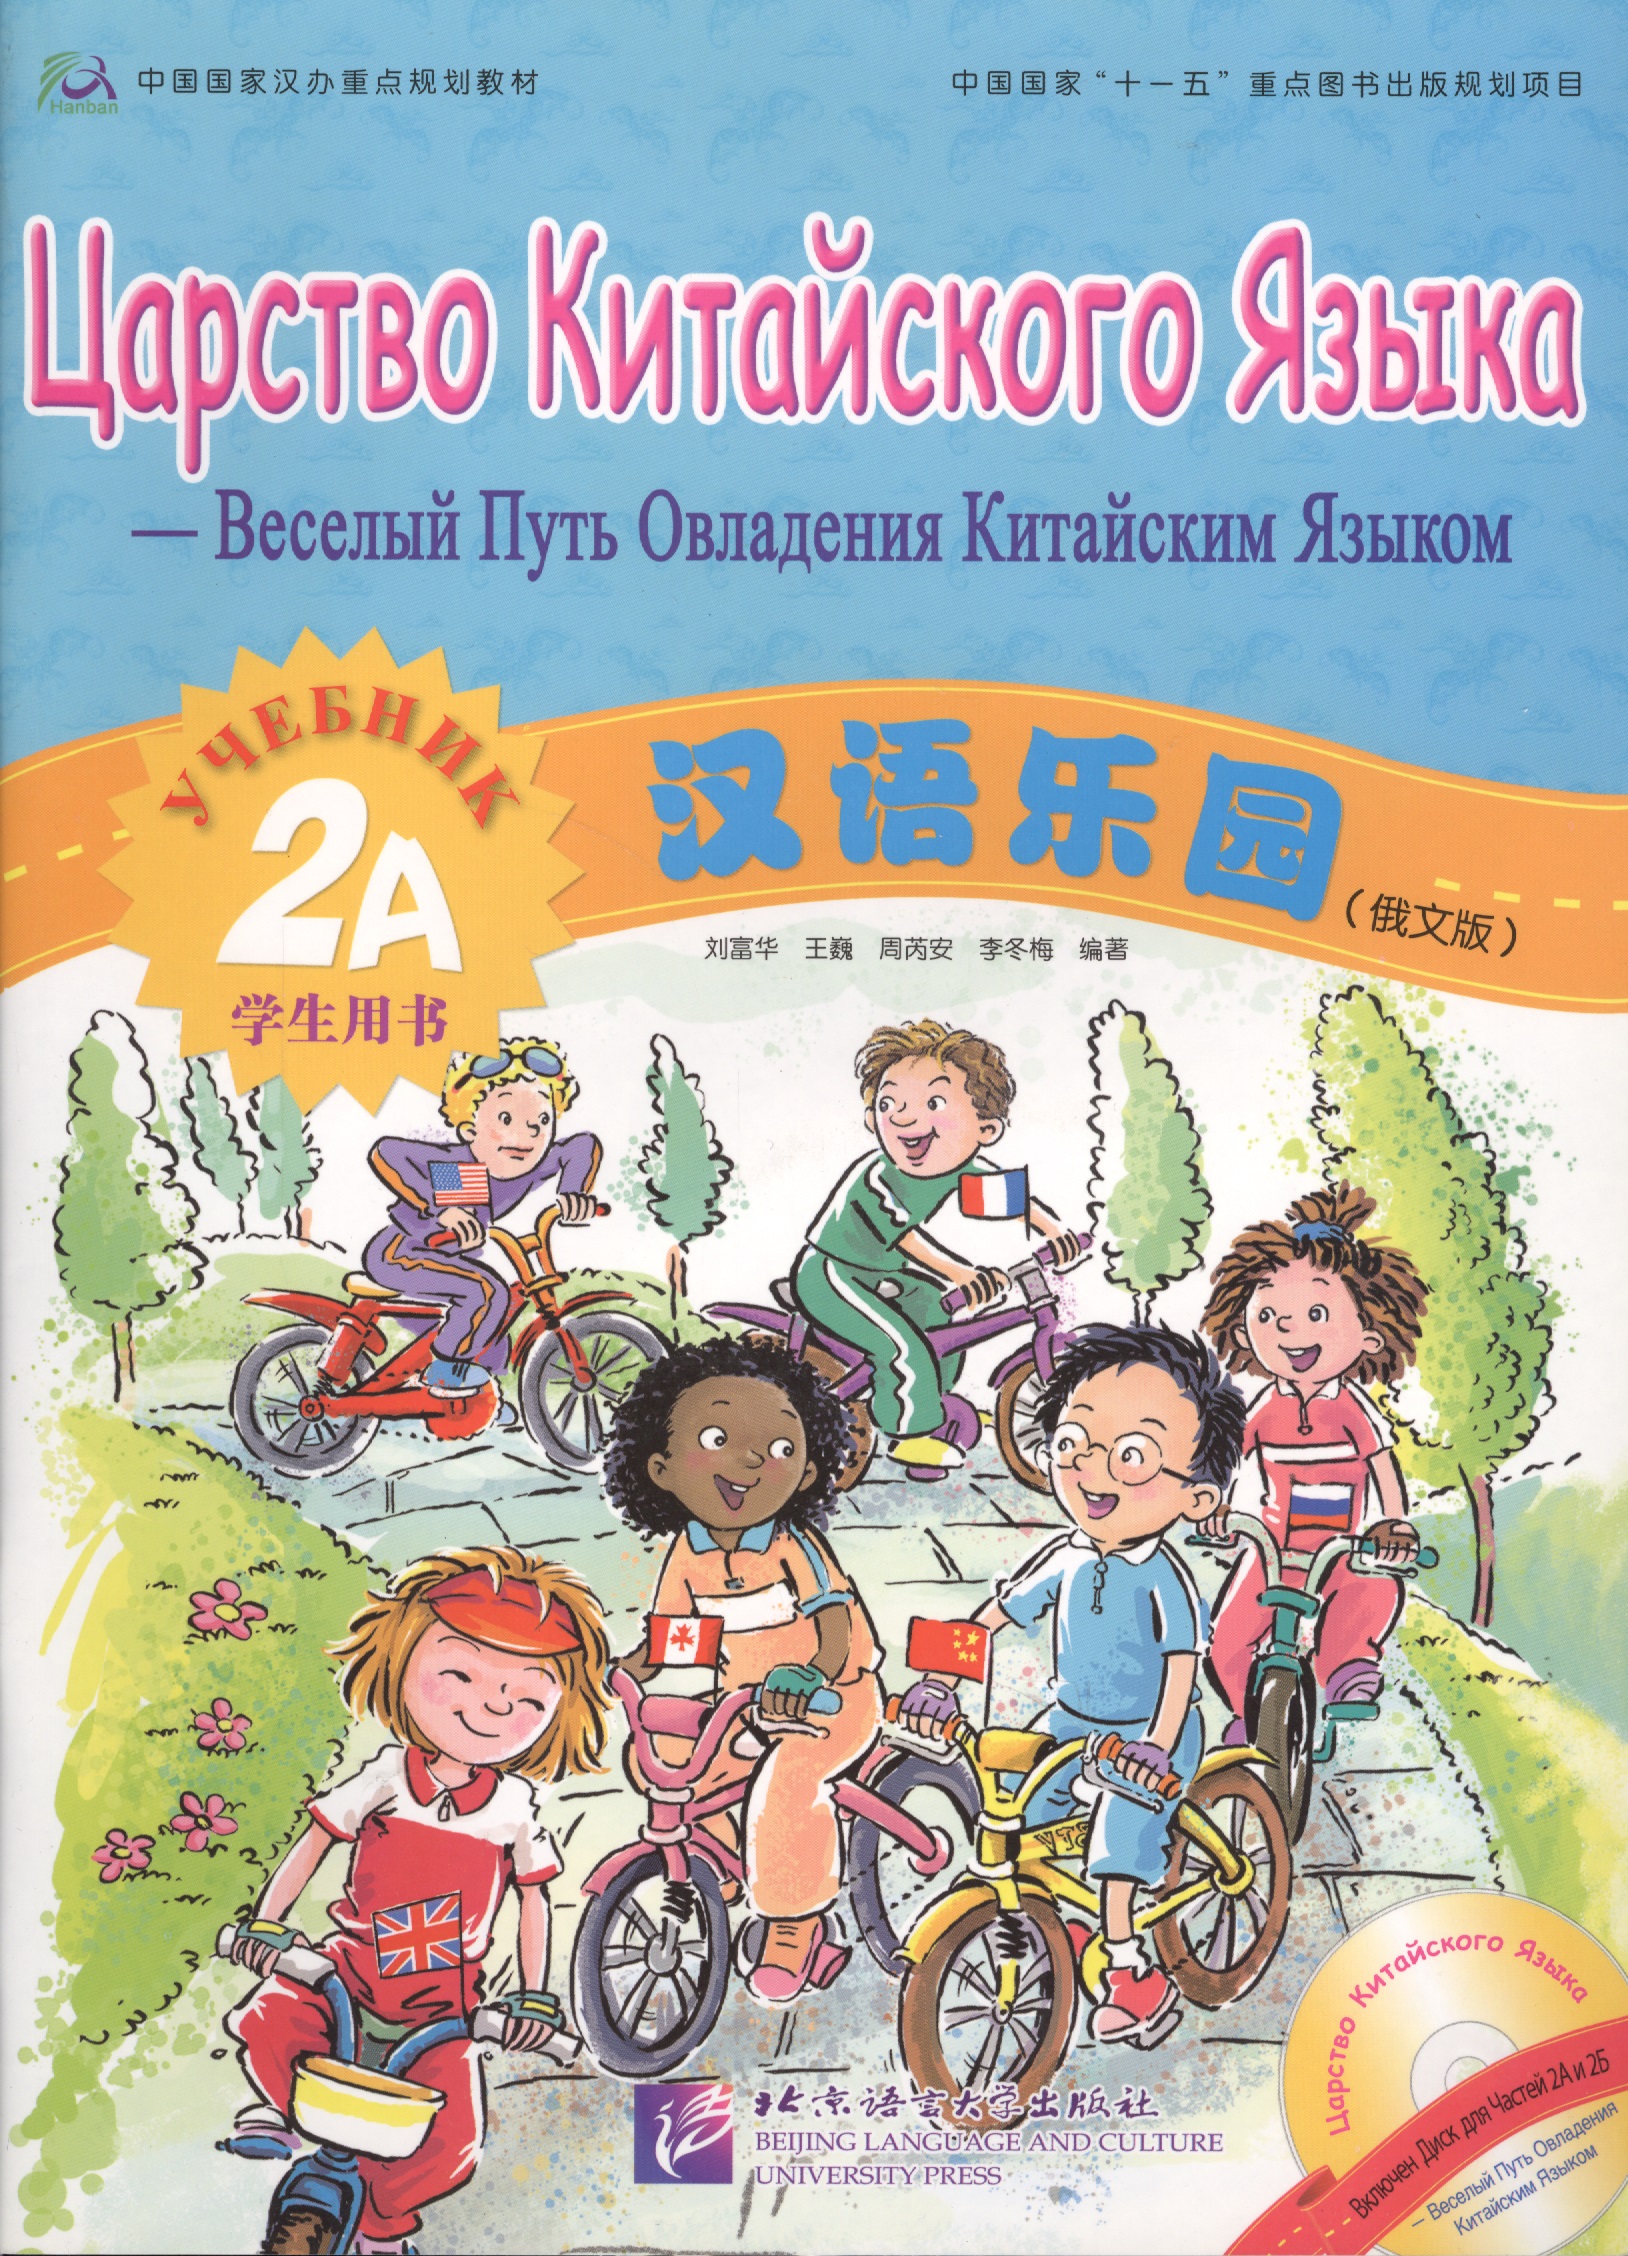 Fuhua L. Chinese Paradise (Russian edition) 2A / Царство китайского языка (русское издание) 2A - Students book with CD fuhua l chinese paradise russian edition 2a царство китайского языка русское издание 2a workbook with cd